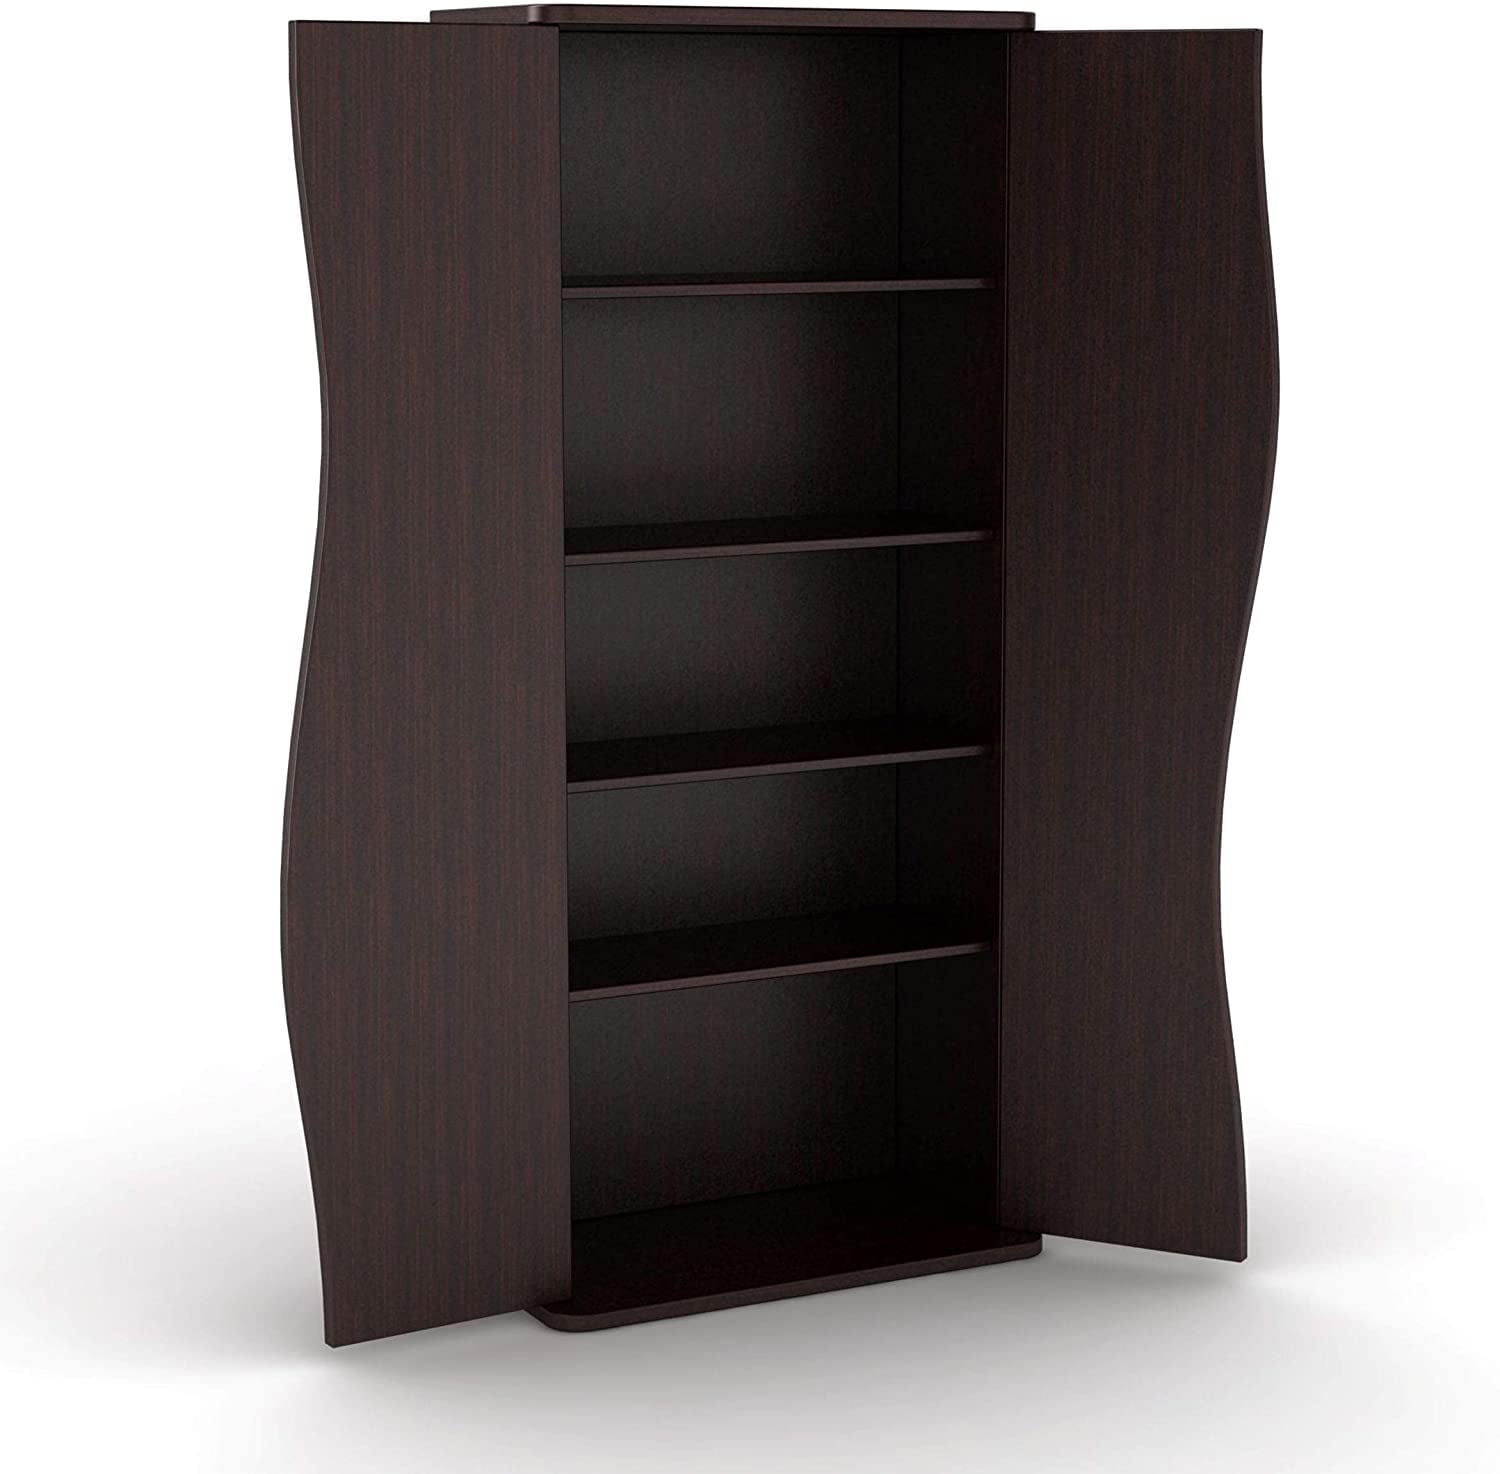 Atlantic Venus Media Storage Cabinet 4 Adjustable and 2 Fixed Shelves PN83035729 in Espresso Renewed Stylish Multimedia Storage Cabinet Holds 198 CDs 88 DVDs or 108 Blu-Rays